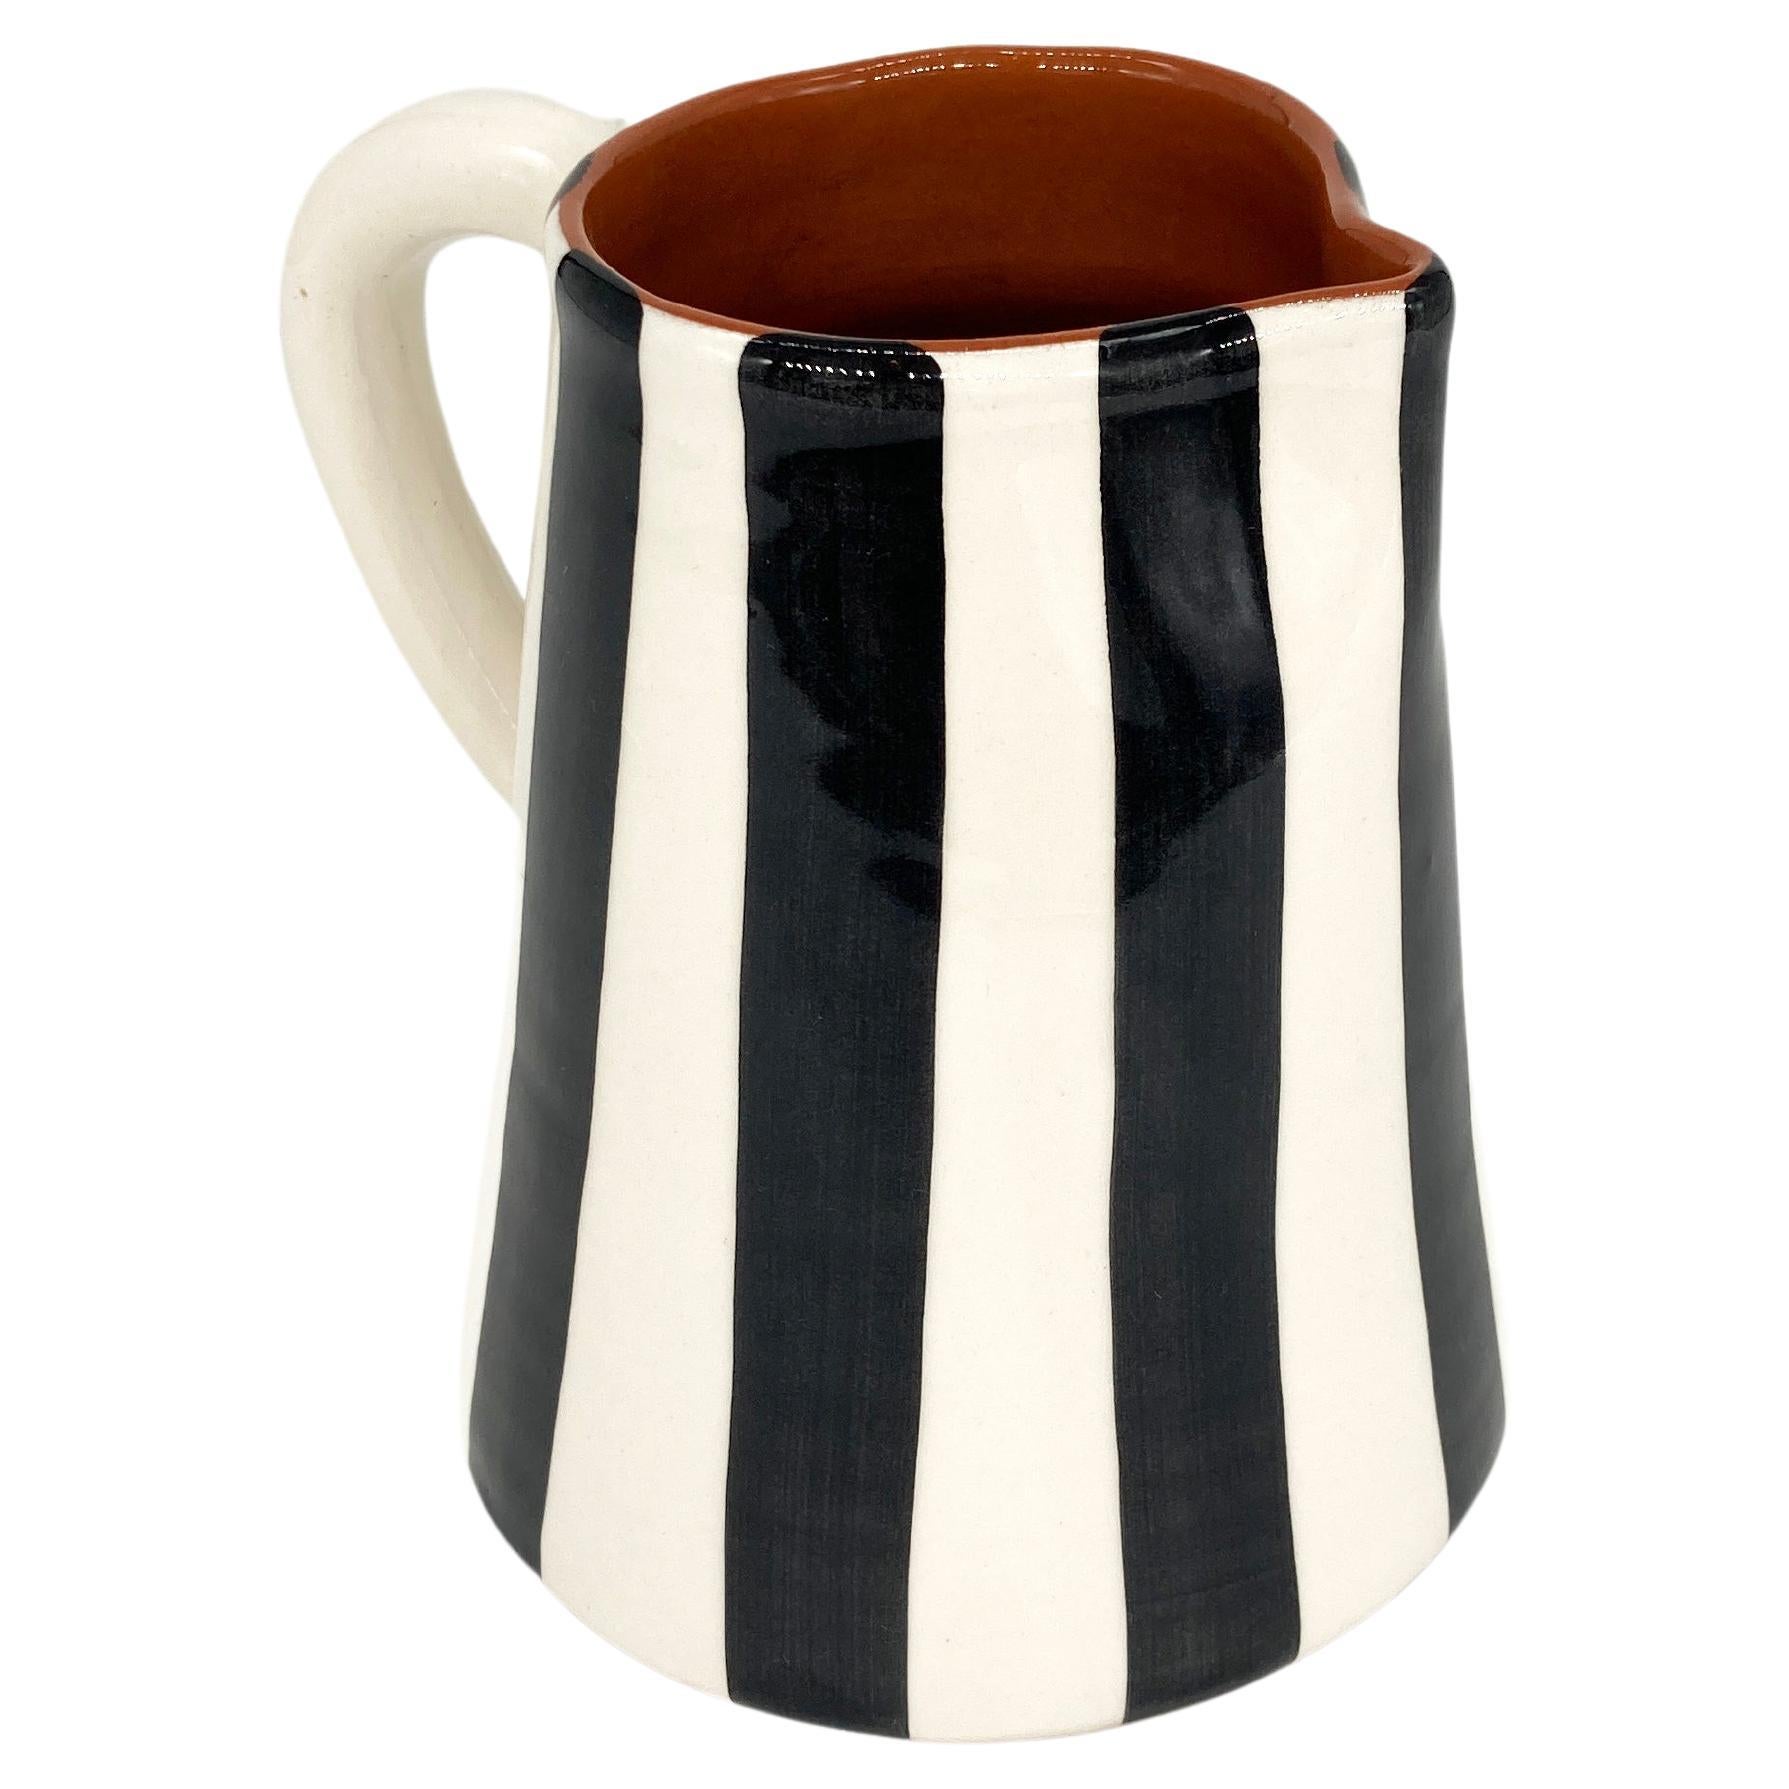 Handmade Ceramic Striped Jug with Graphic Black and White Design, in Stock